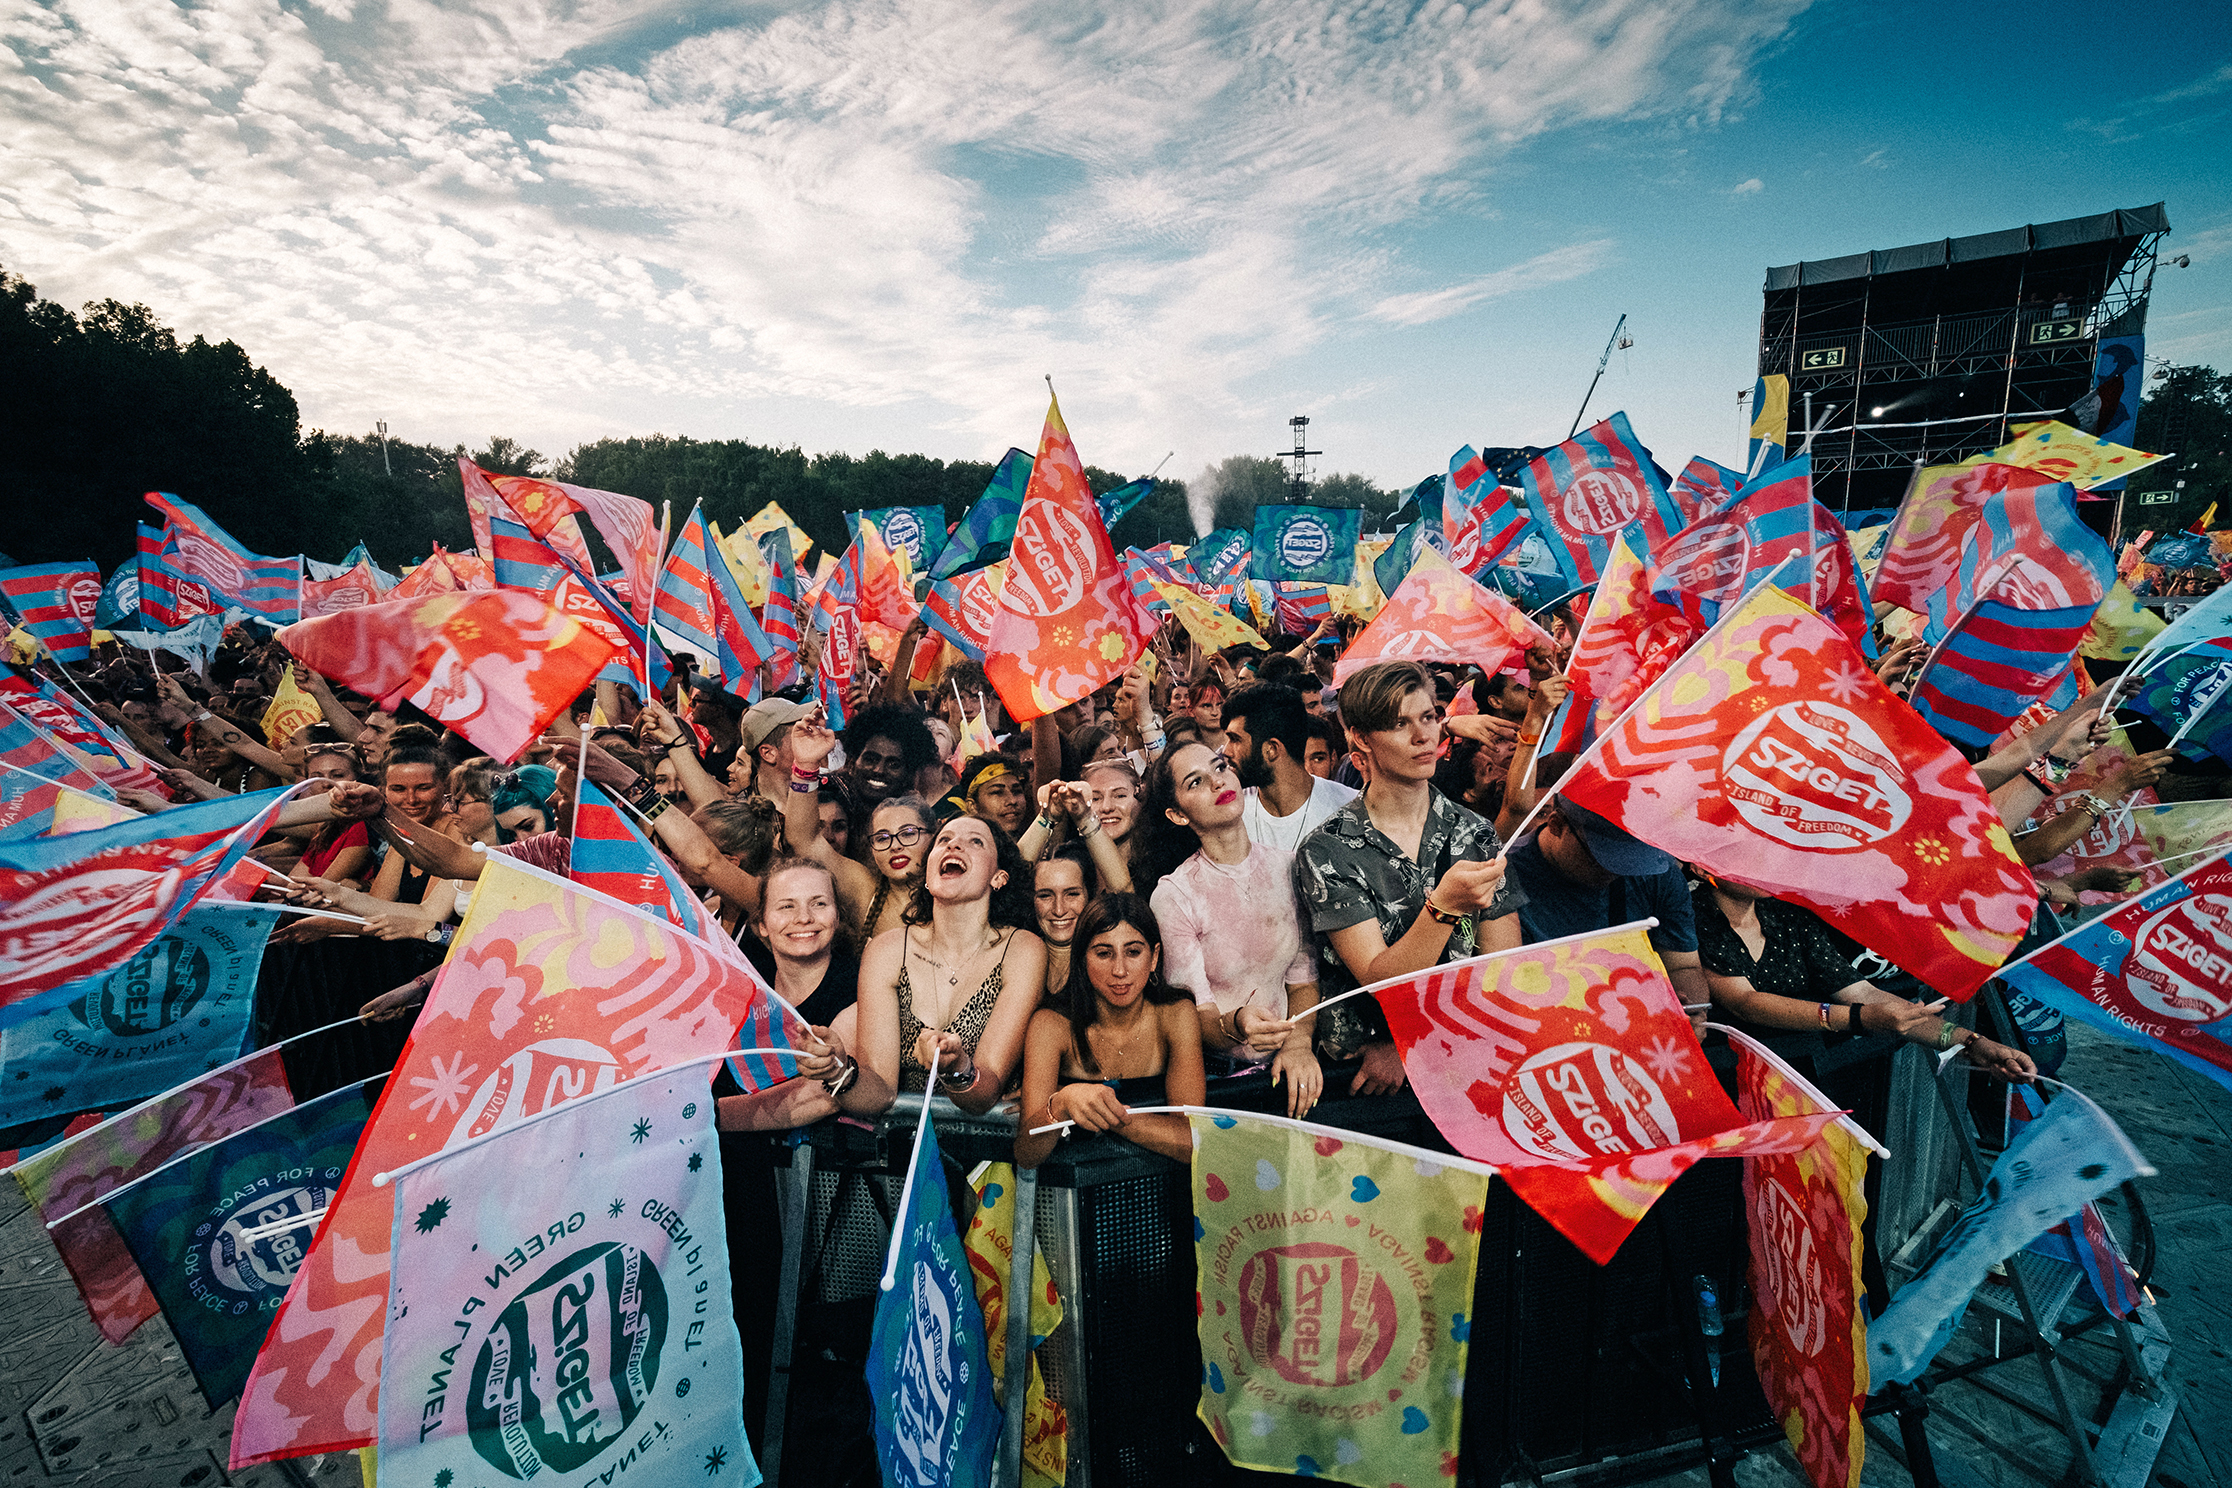 What Do You Get in Return for a Sziget Day Ticket?